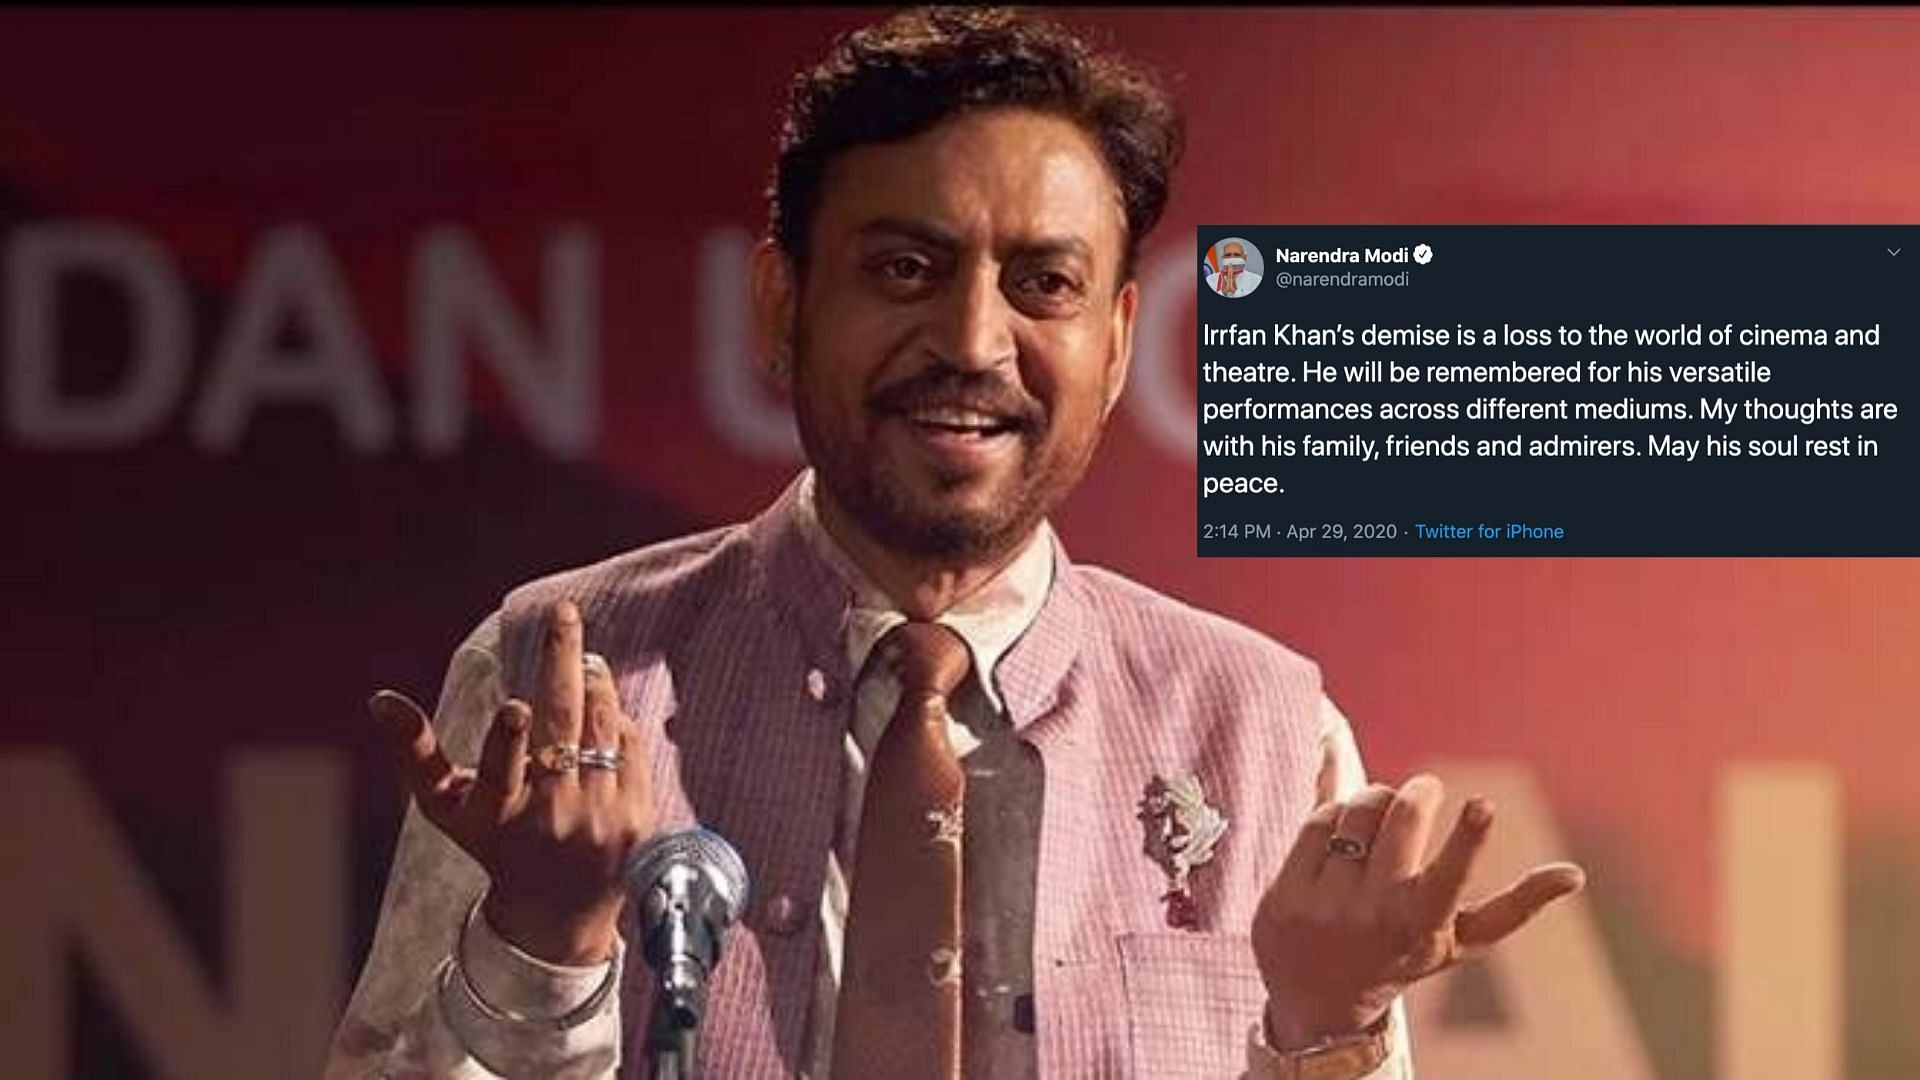 Irrfan Khan passed away at the age of 53 on Wednesday.